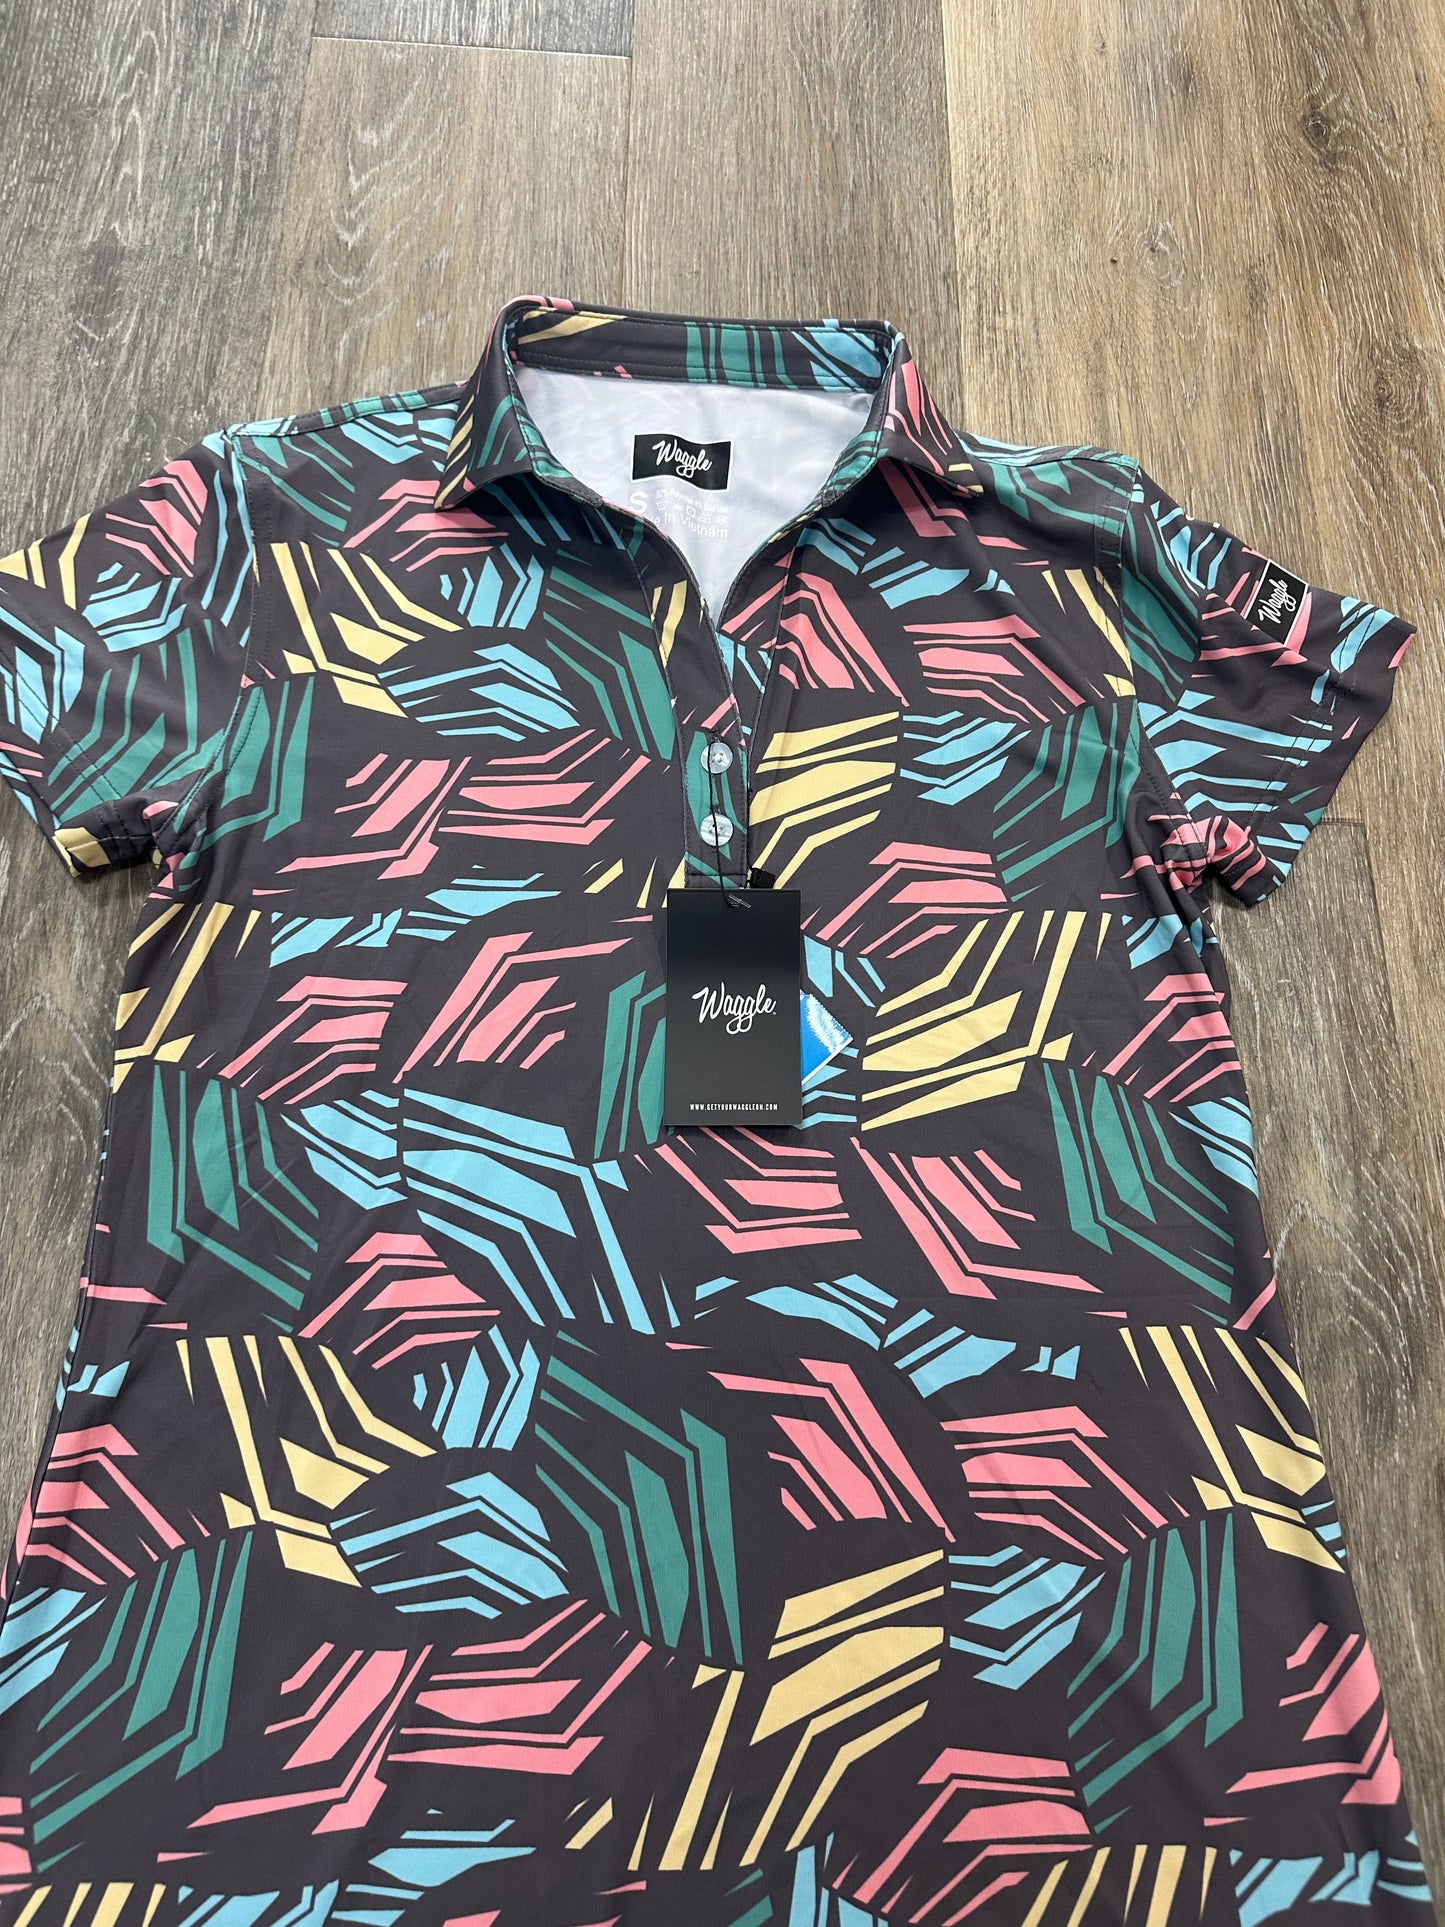 Multi-colored Athletic Top Short Sleeve Waggle, Size S